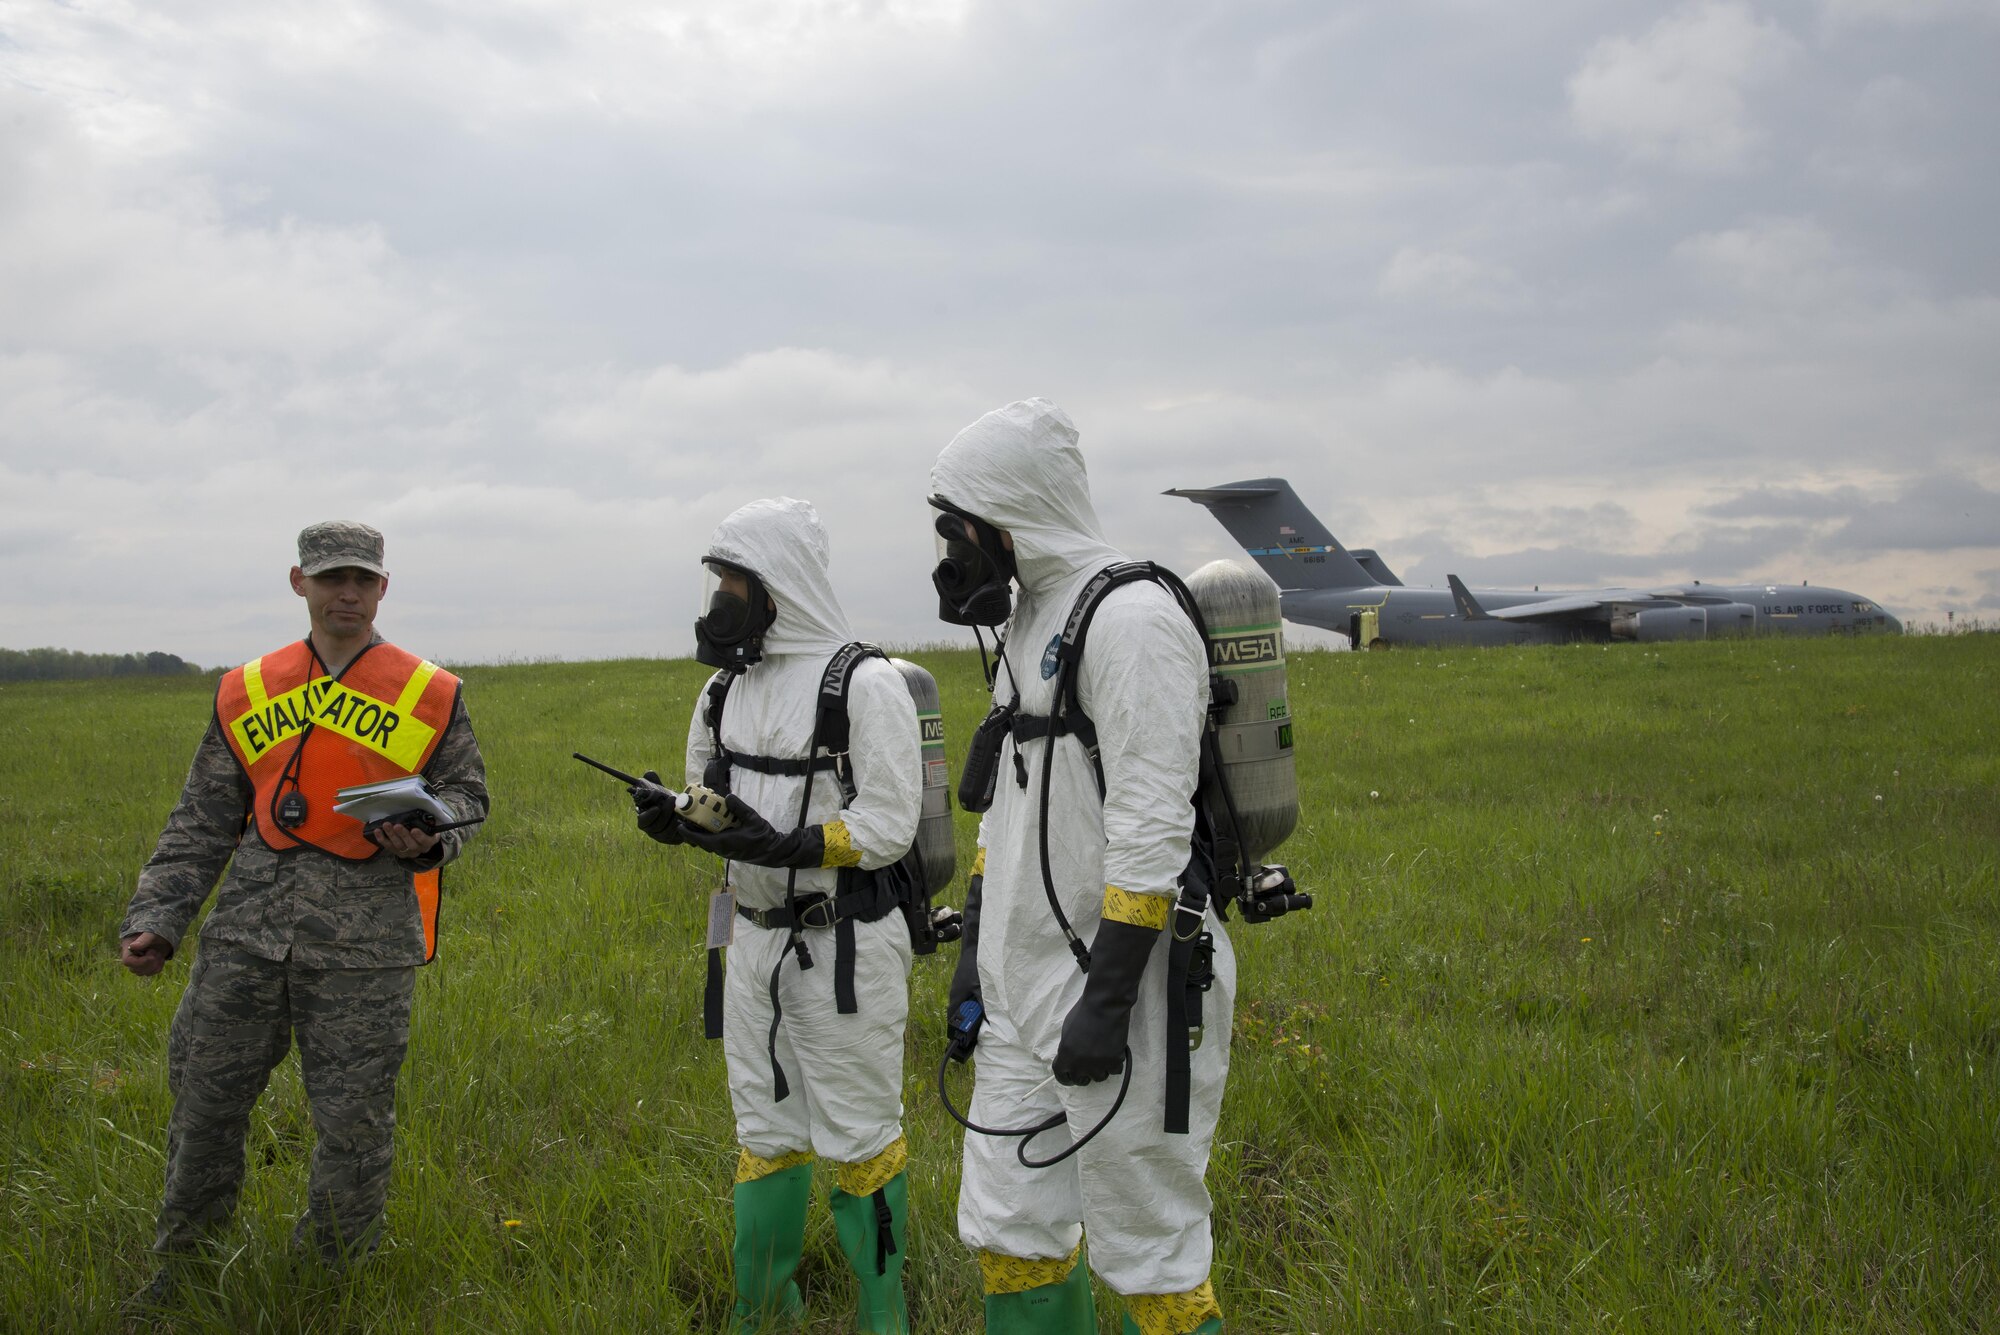 From left, Tech. Sgt. Jeffry Stamm, 436th Aerospace Medicine Squadron Bioenvironmental Engineering flight chief, provides simulated air quality values with Senior Airmen Jorge Rijo and Alexander Delfs, bioenvironmental engineering technicians, during a fuel spill exercise April 20, 2017, near a flightline drainage spill gateon Dover Air Force Base, Del. Rijo relayed the simulated values via radio to the temporary control center, which acted as a communication hub between emergency responders and other installation command agencies. (U.S. Air Force photo by Senior Airman Aaron J. Jenne)